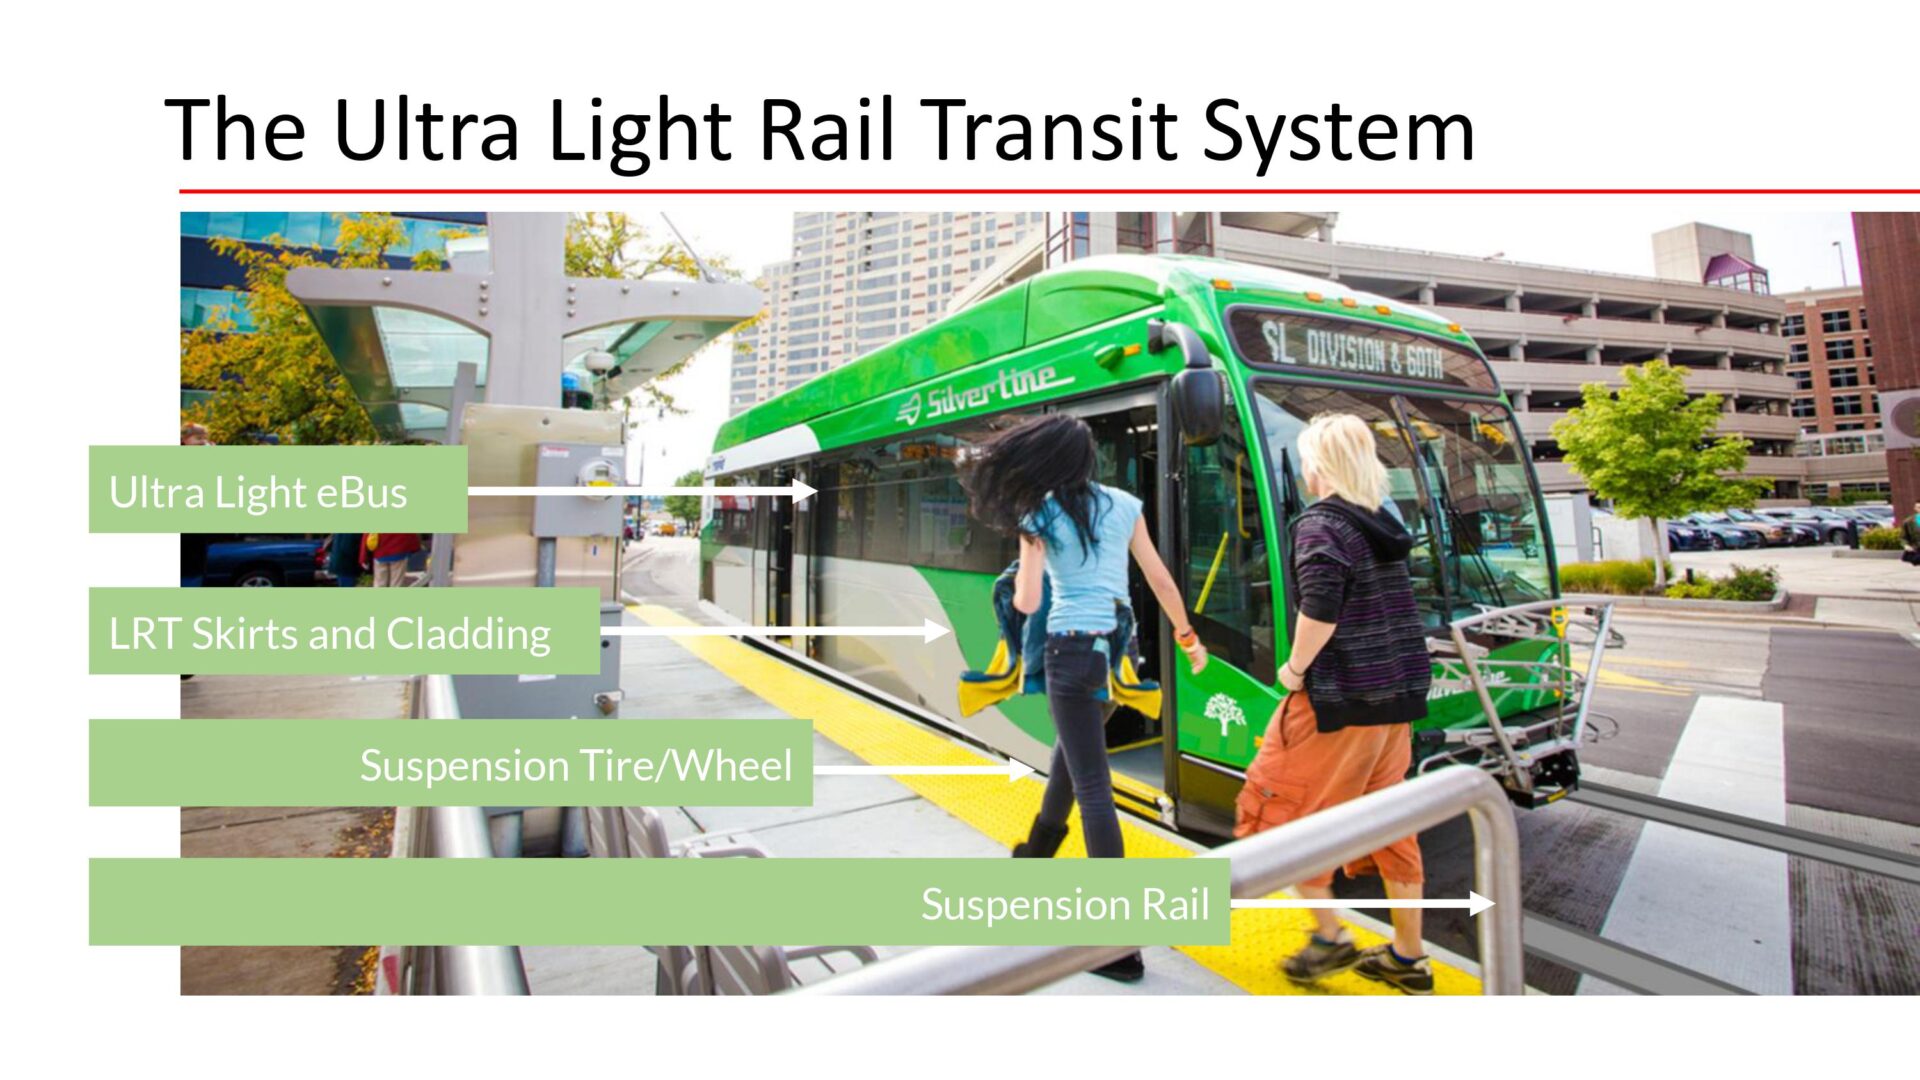 A picture of the light rail transit system.